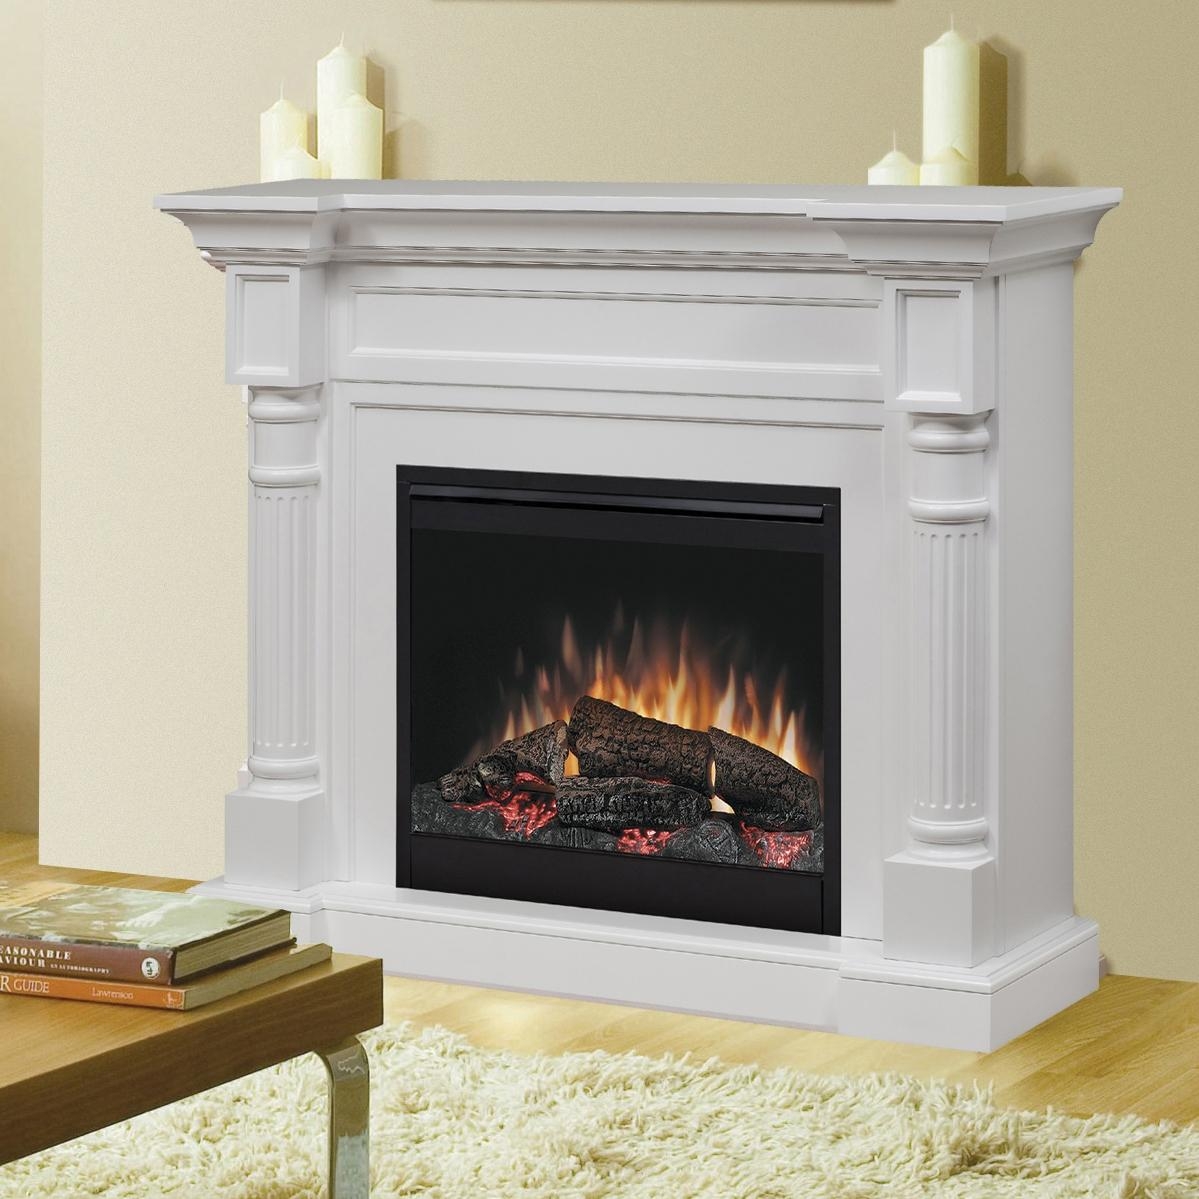 Temco Fireplace New 62 Electric Fireplace Charming Fireplace